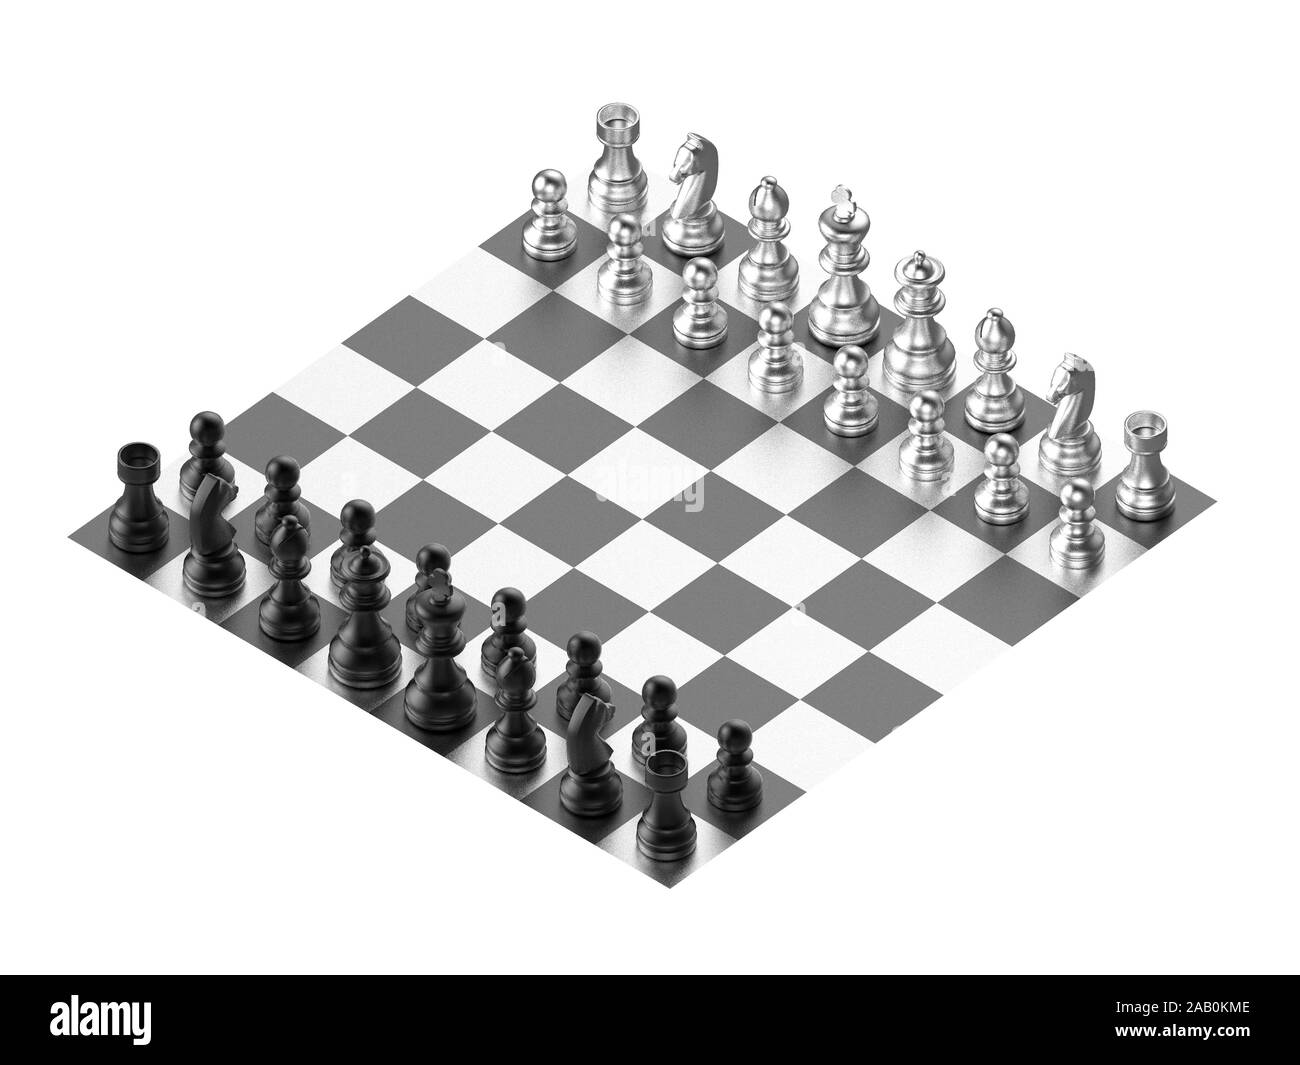 Crome Chess Projects  Photos, videos, logos, illustrations and